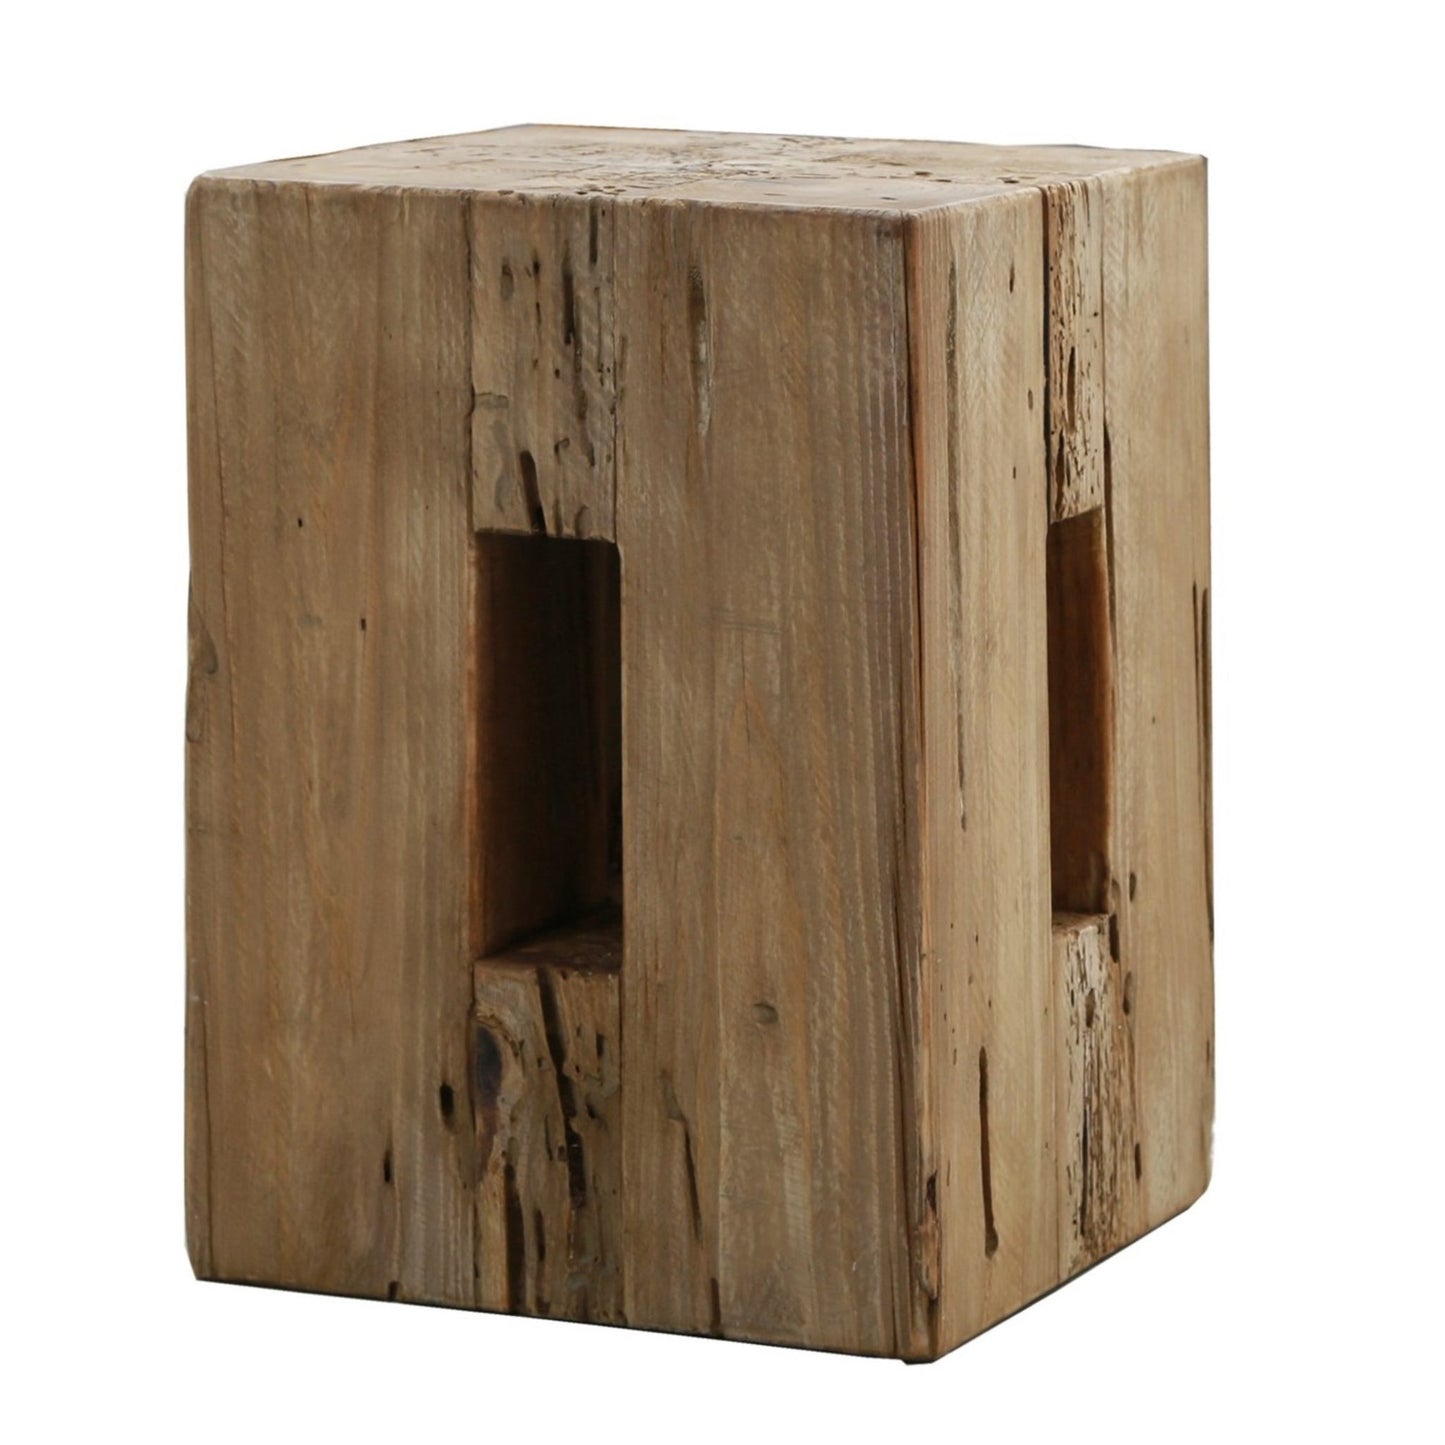 14% Off, Recycled Wooden Ottoman Stool